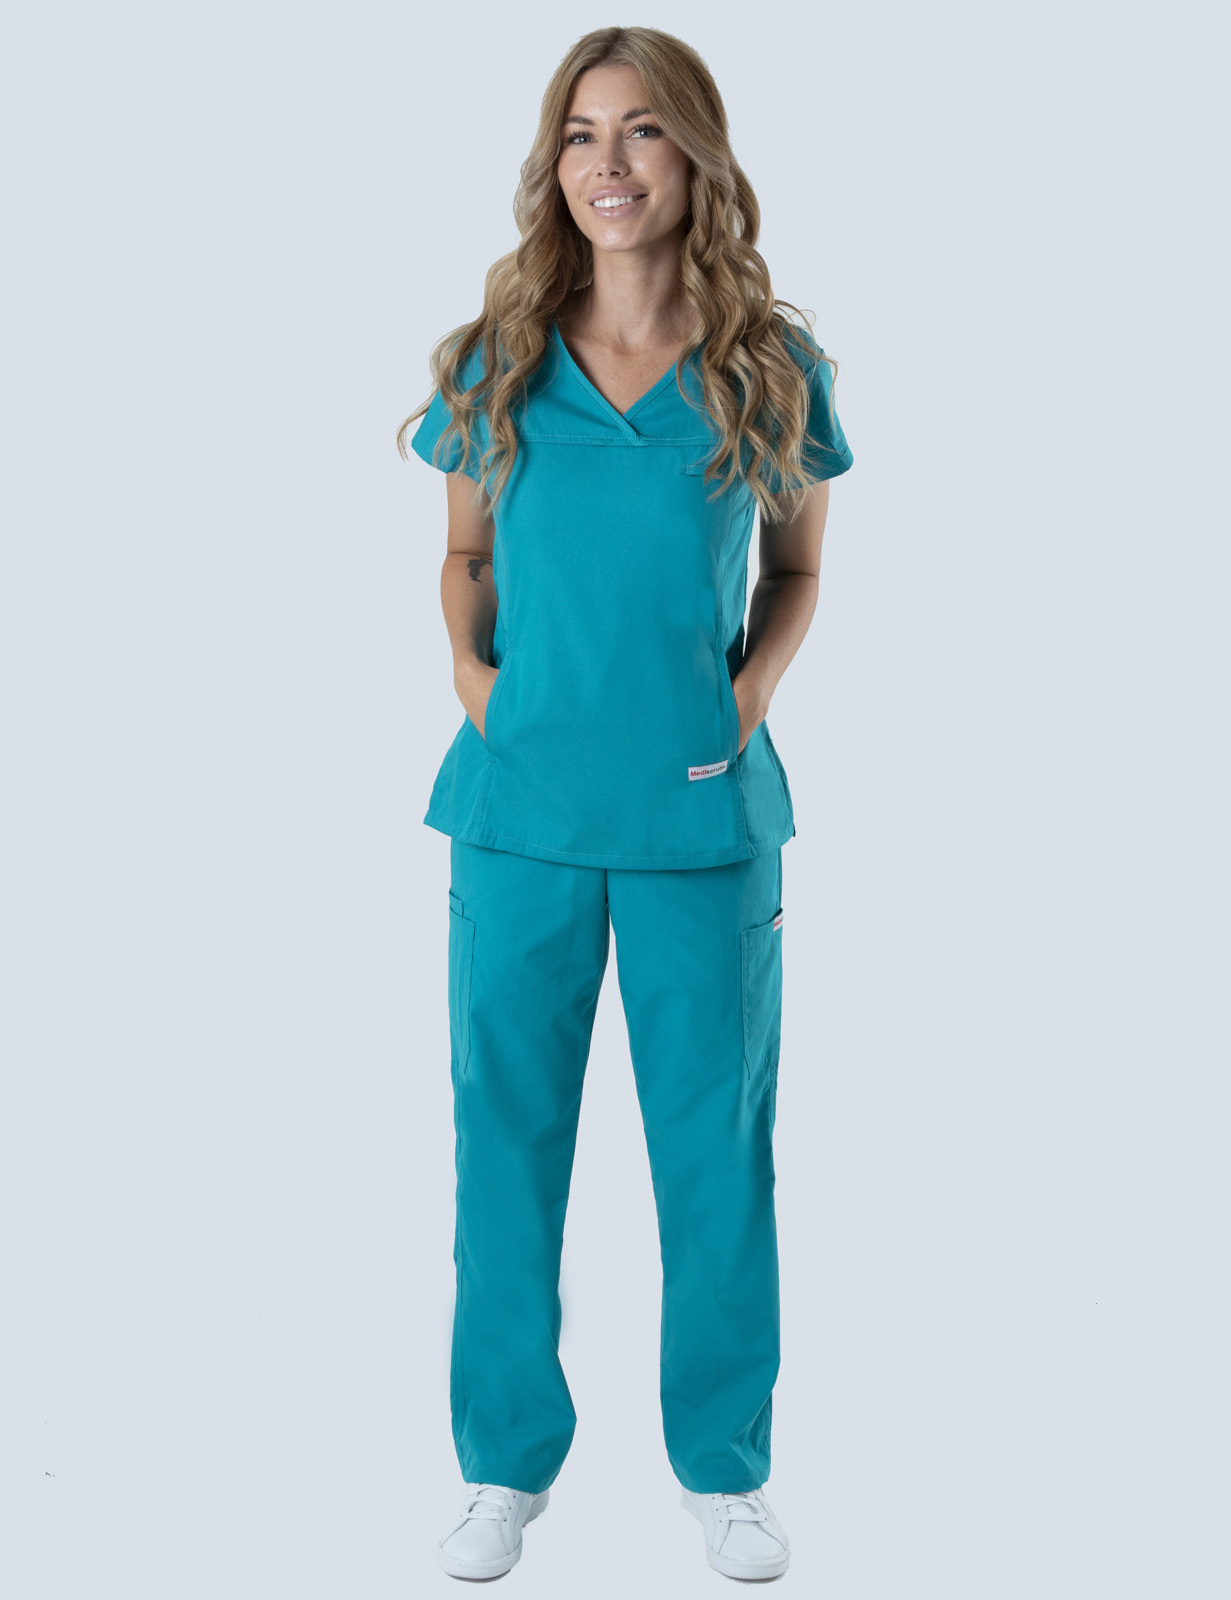 Women's Fit Solid Scrub Top - Teal - X Small - 0